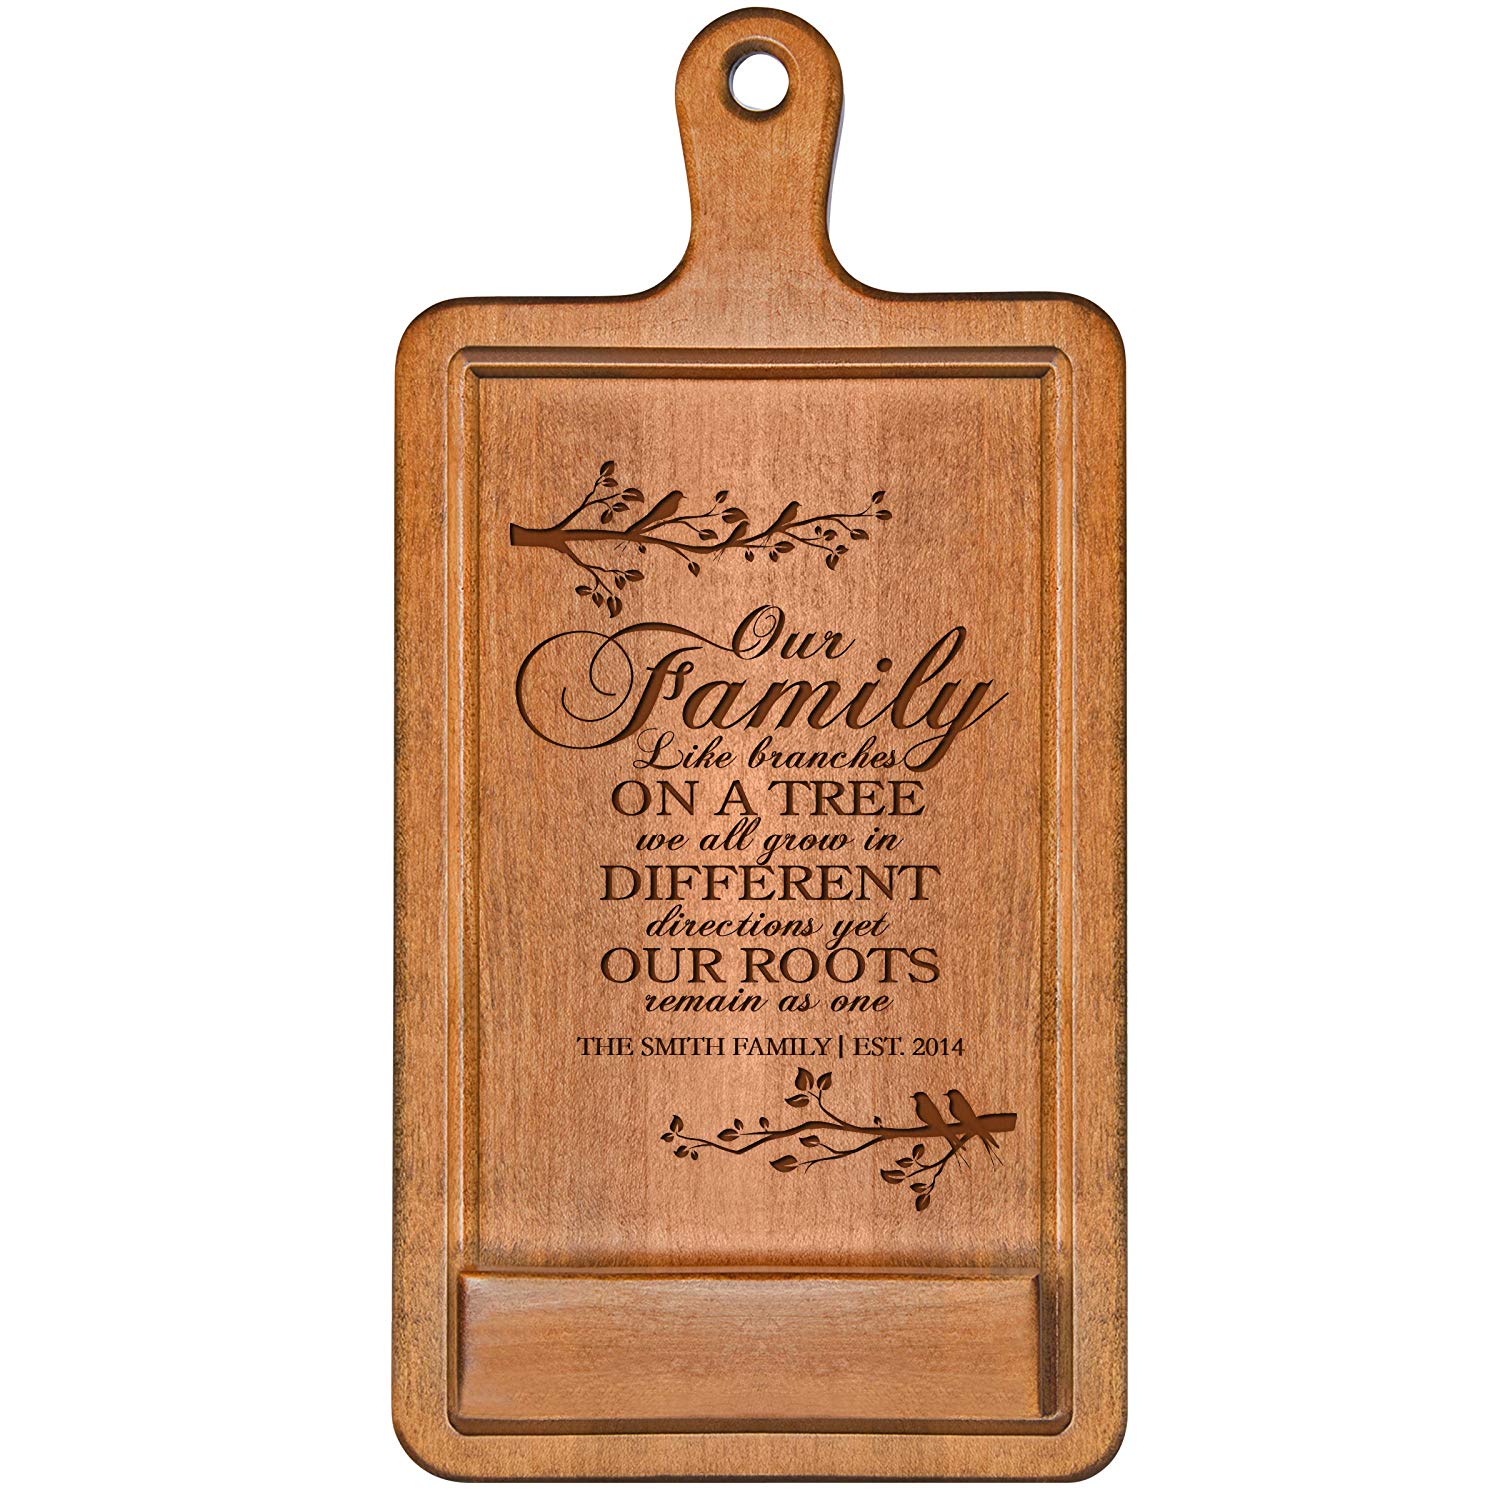 Personalized Cherry iPad Cook Book Holder - Our Family Like Branches - LifeSong Milestones